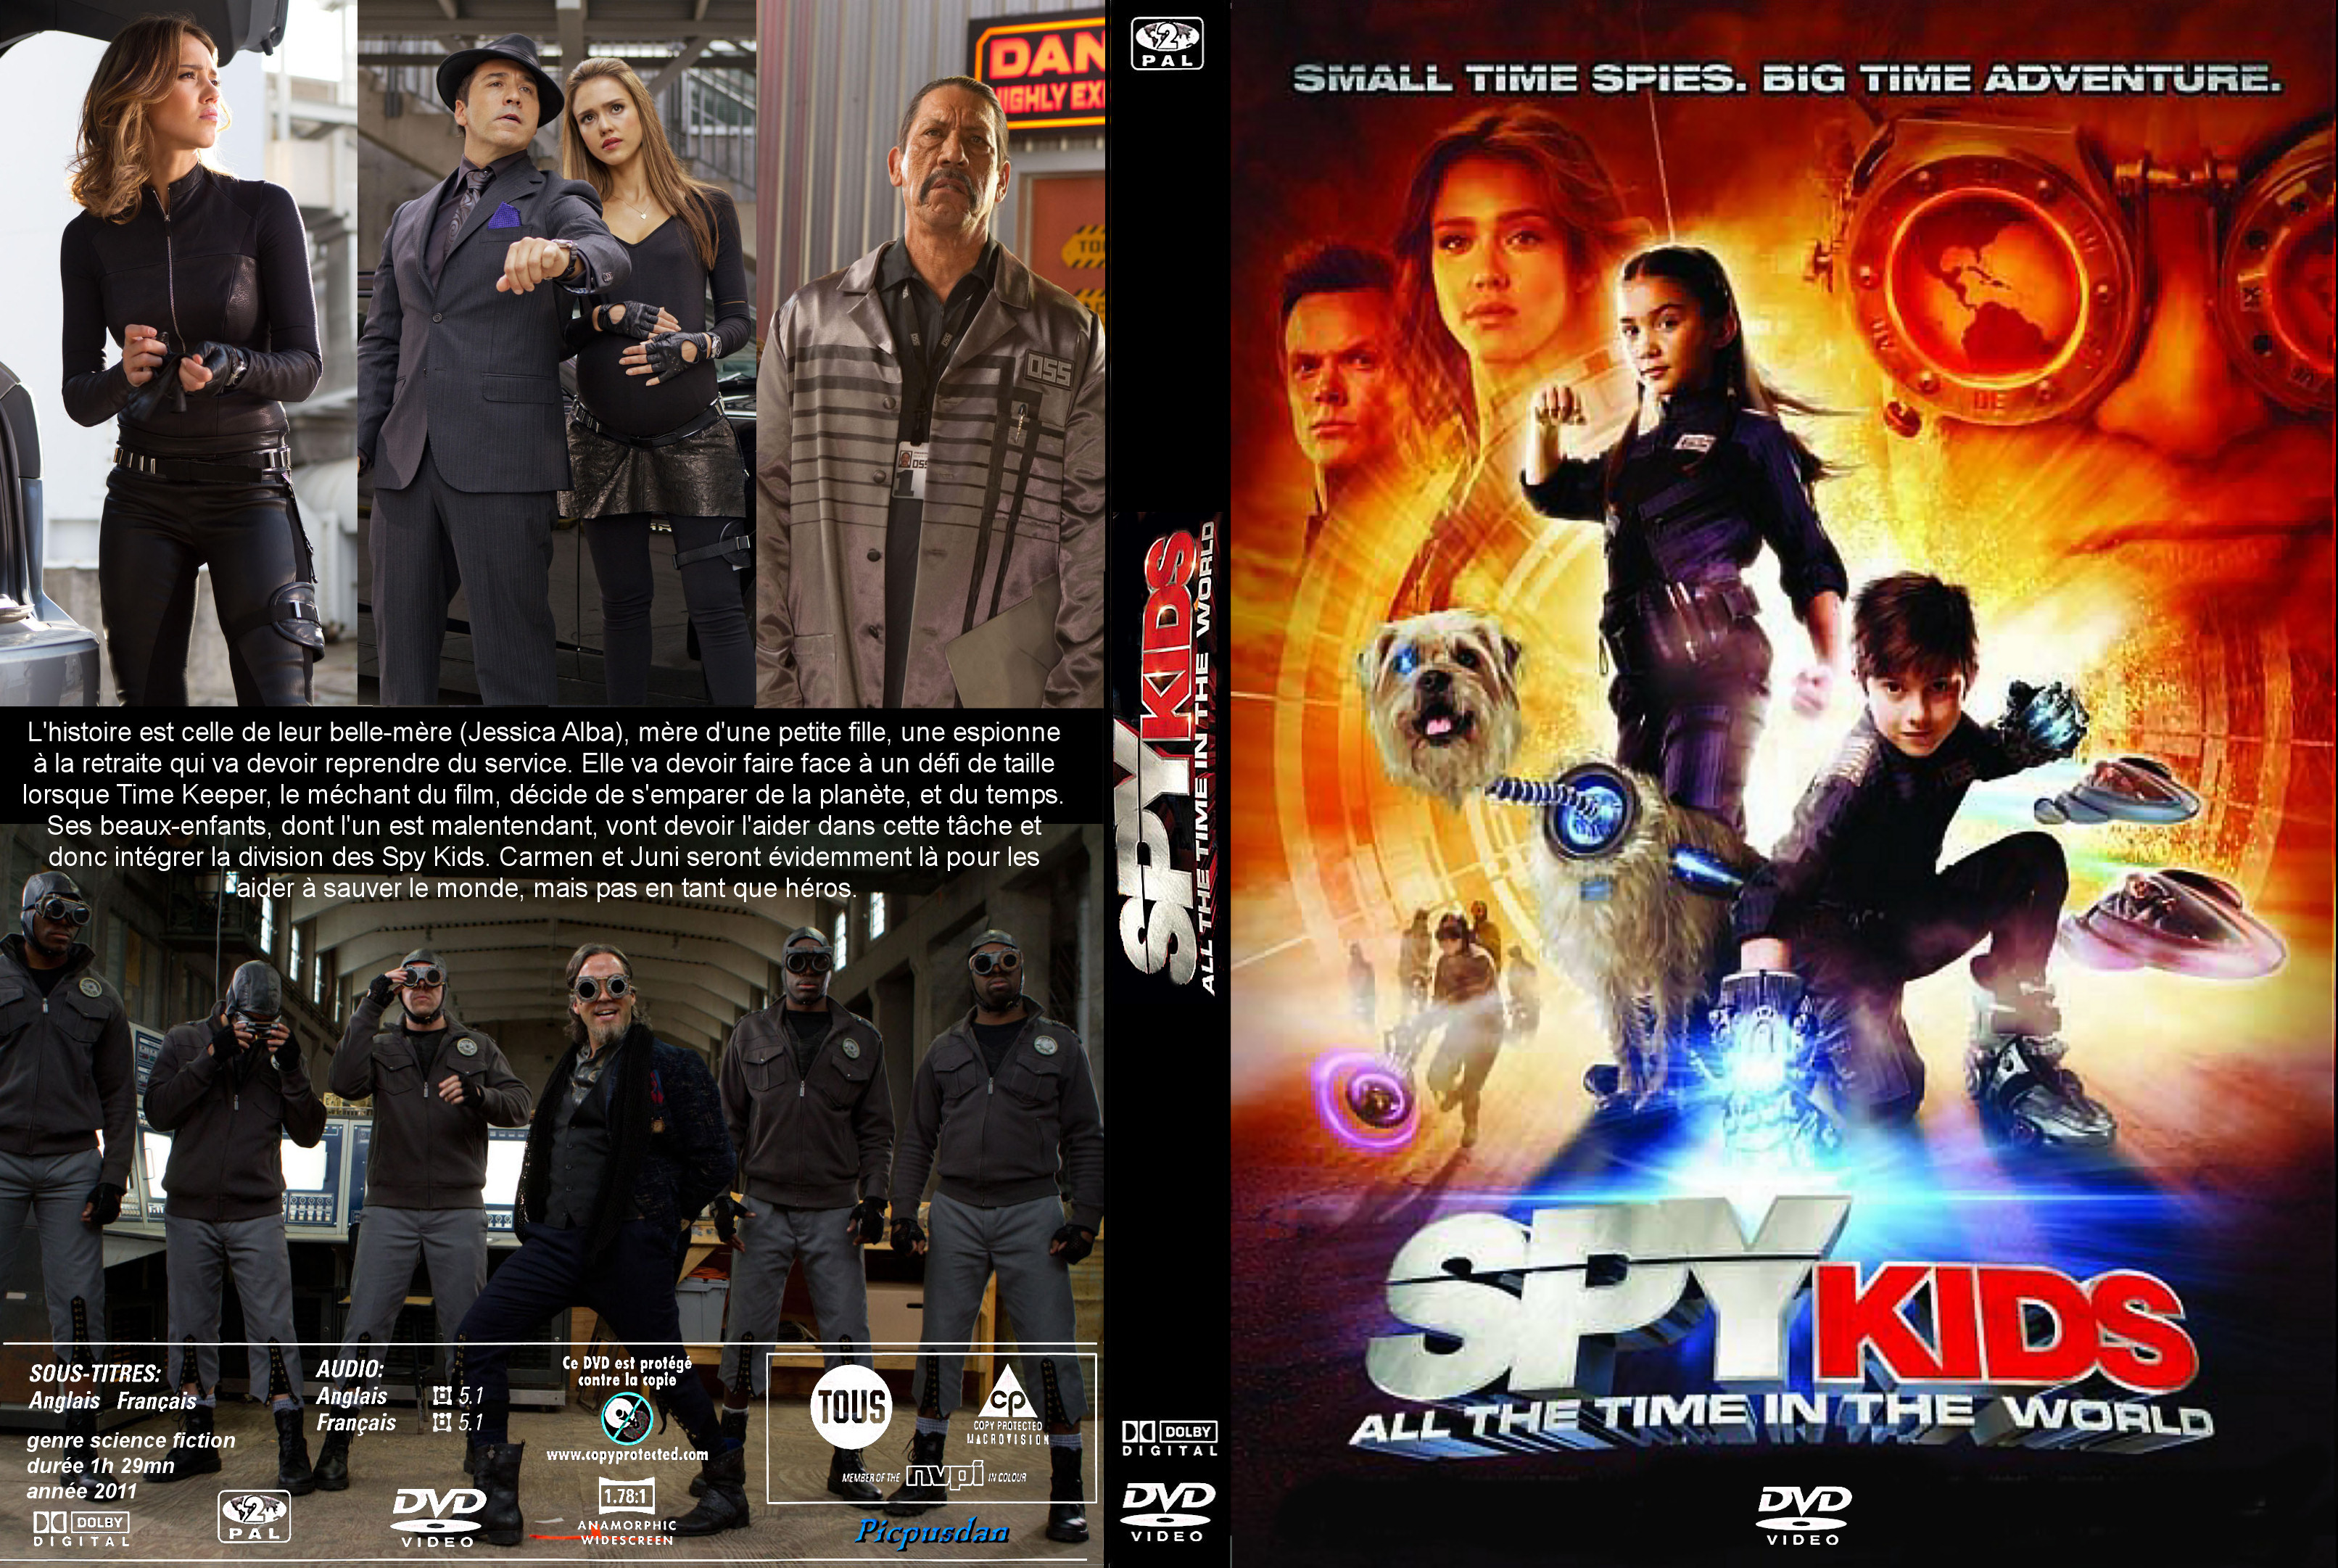 Jaquette DVD Spy Kids 4: All the Time in the World custom